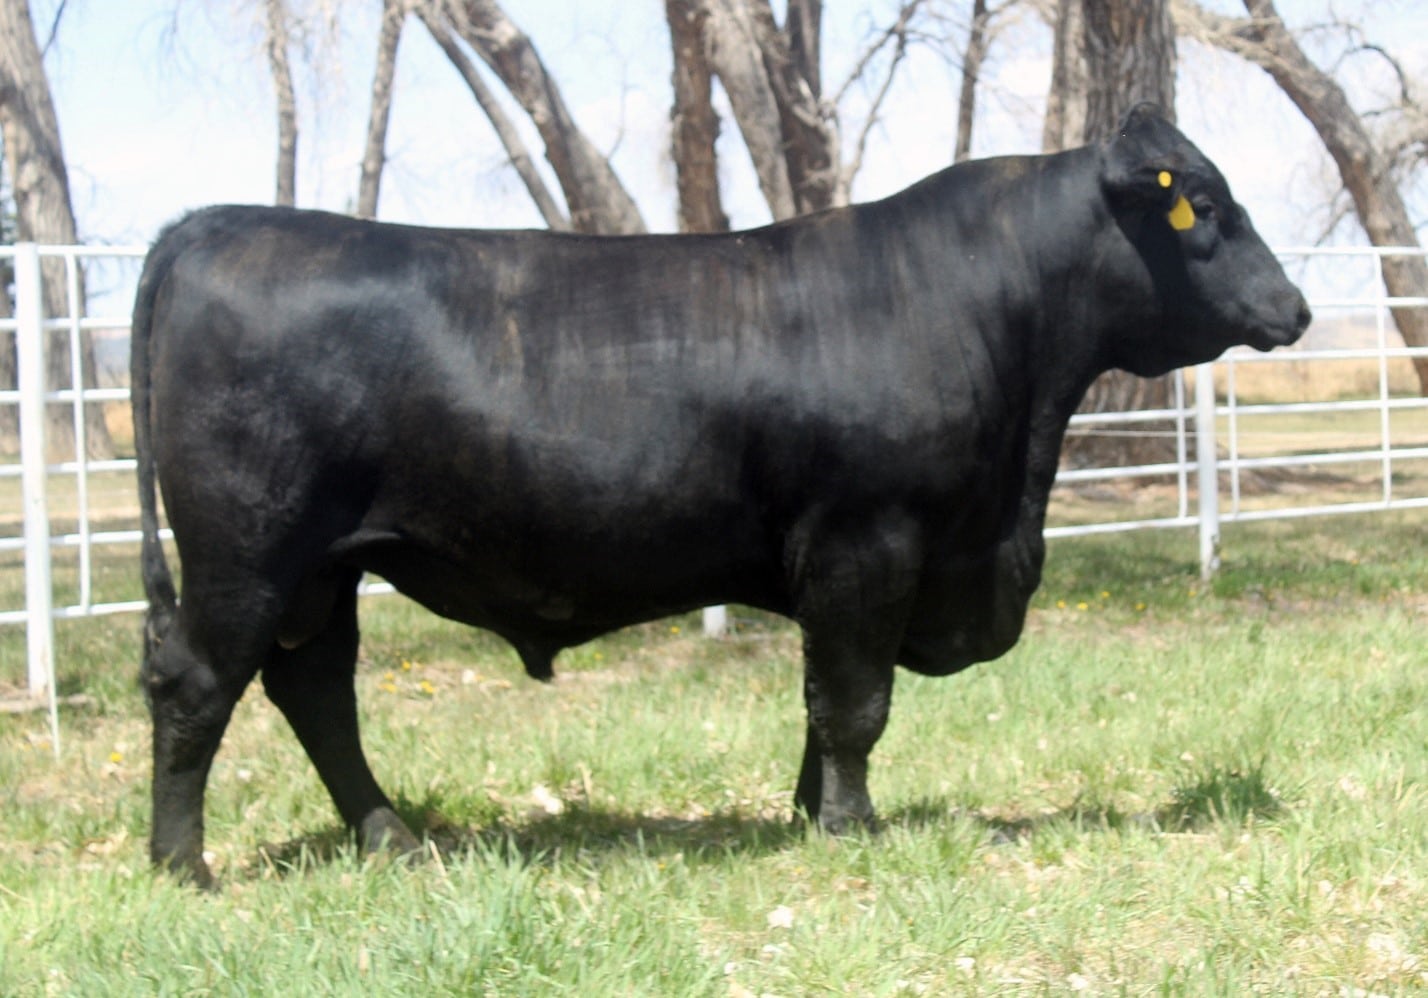  The first SLICK Angus bull, Stay Cool, commercially available in the U.S. 